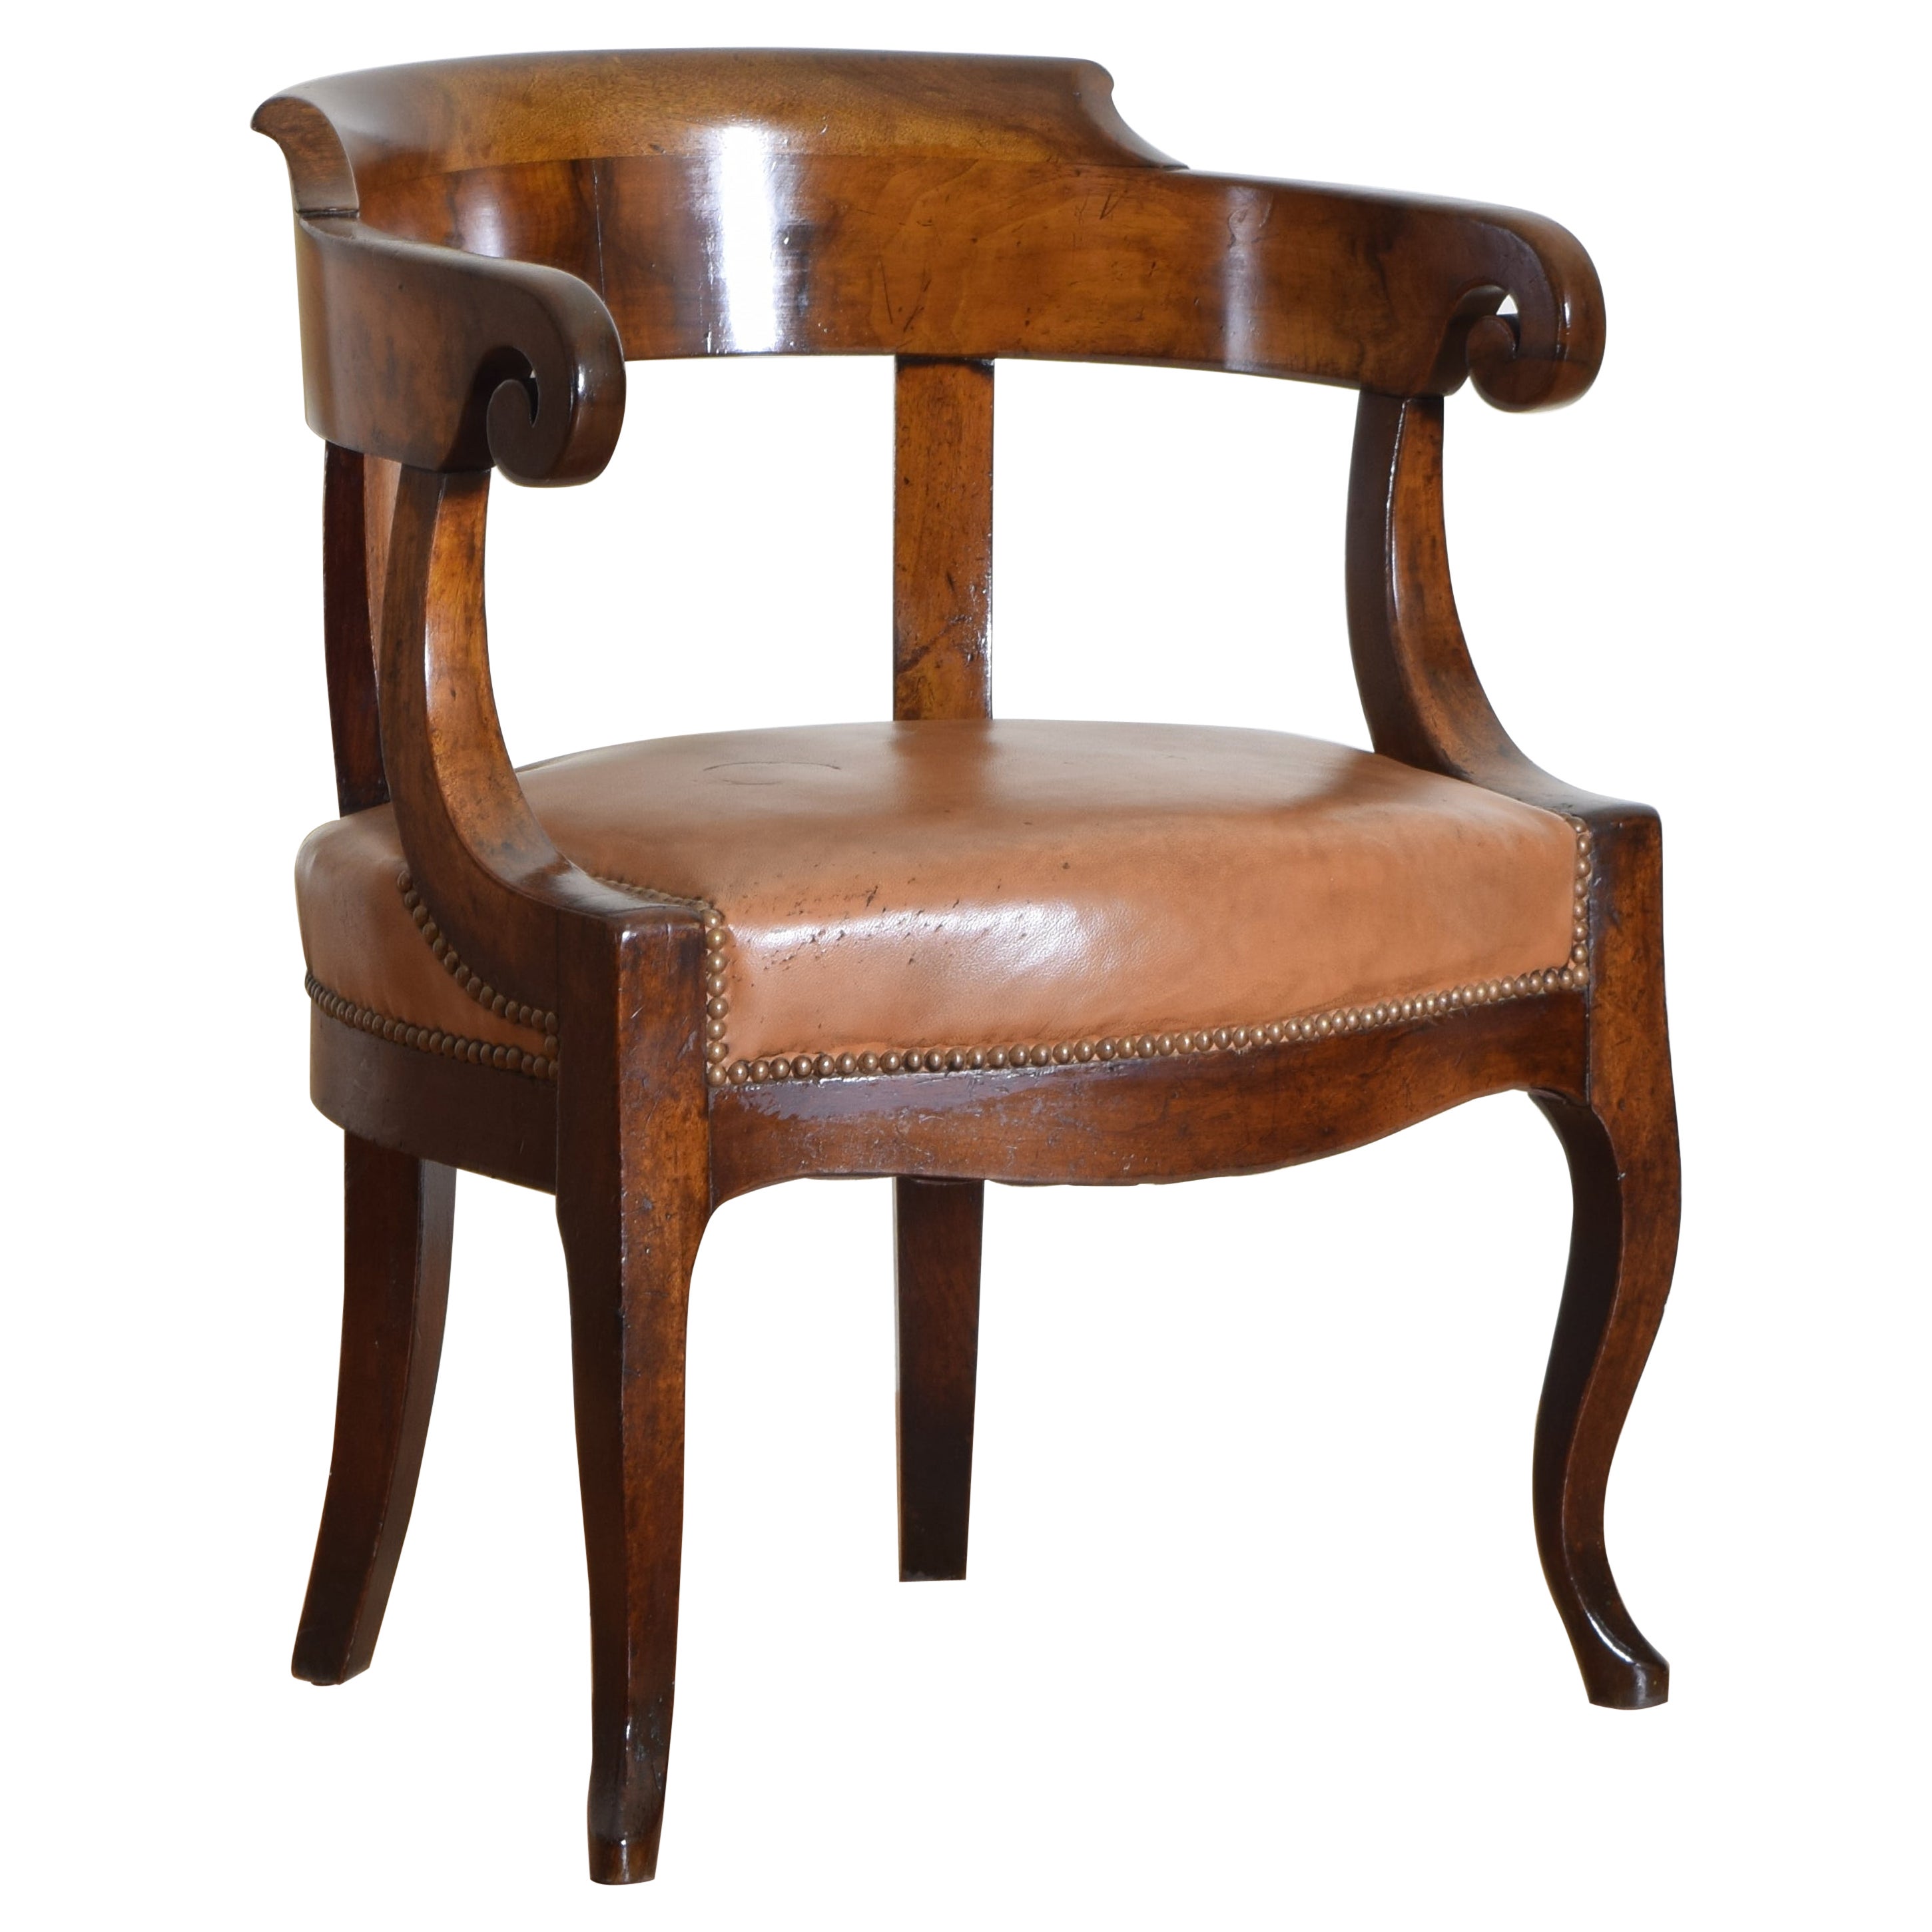 French Louis Philippe Walnut and Leather Upholstered Desk Chair, 2ndq 19th Cen